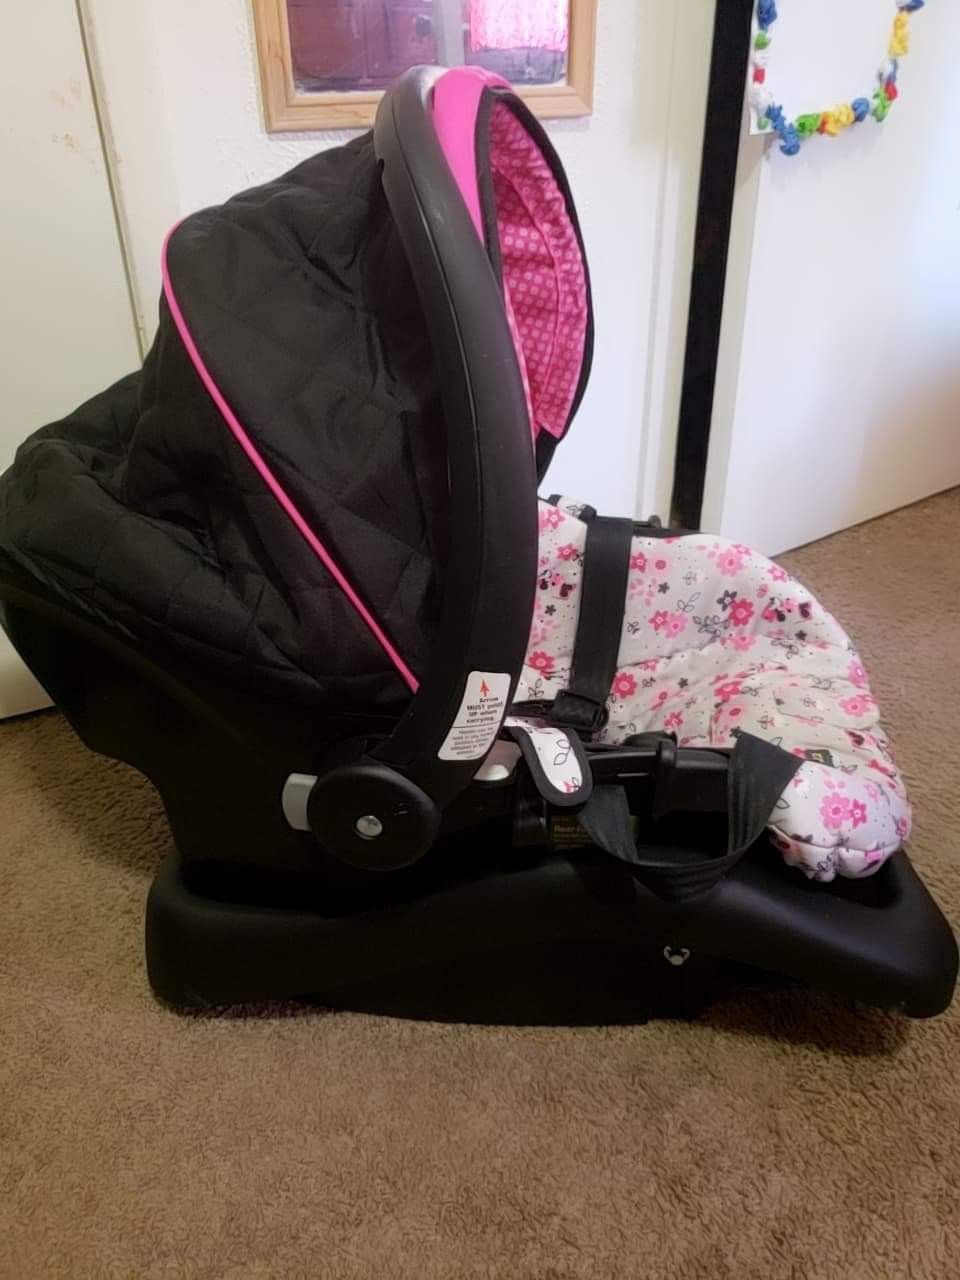 Set stroller and carrier seat together or separately